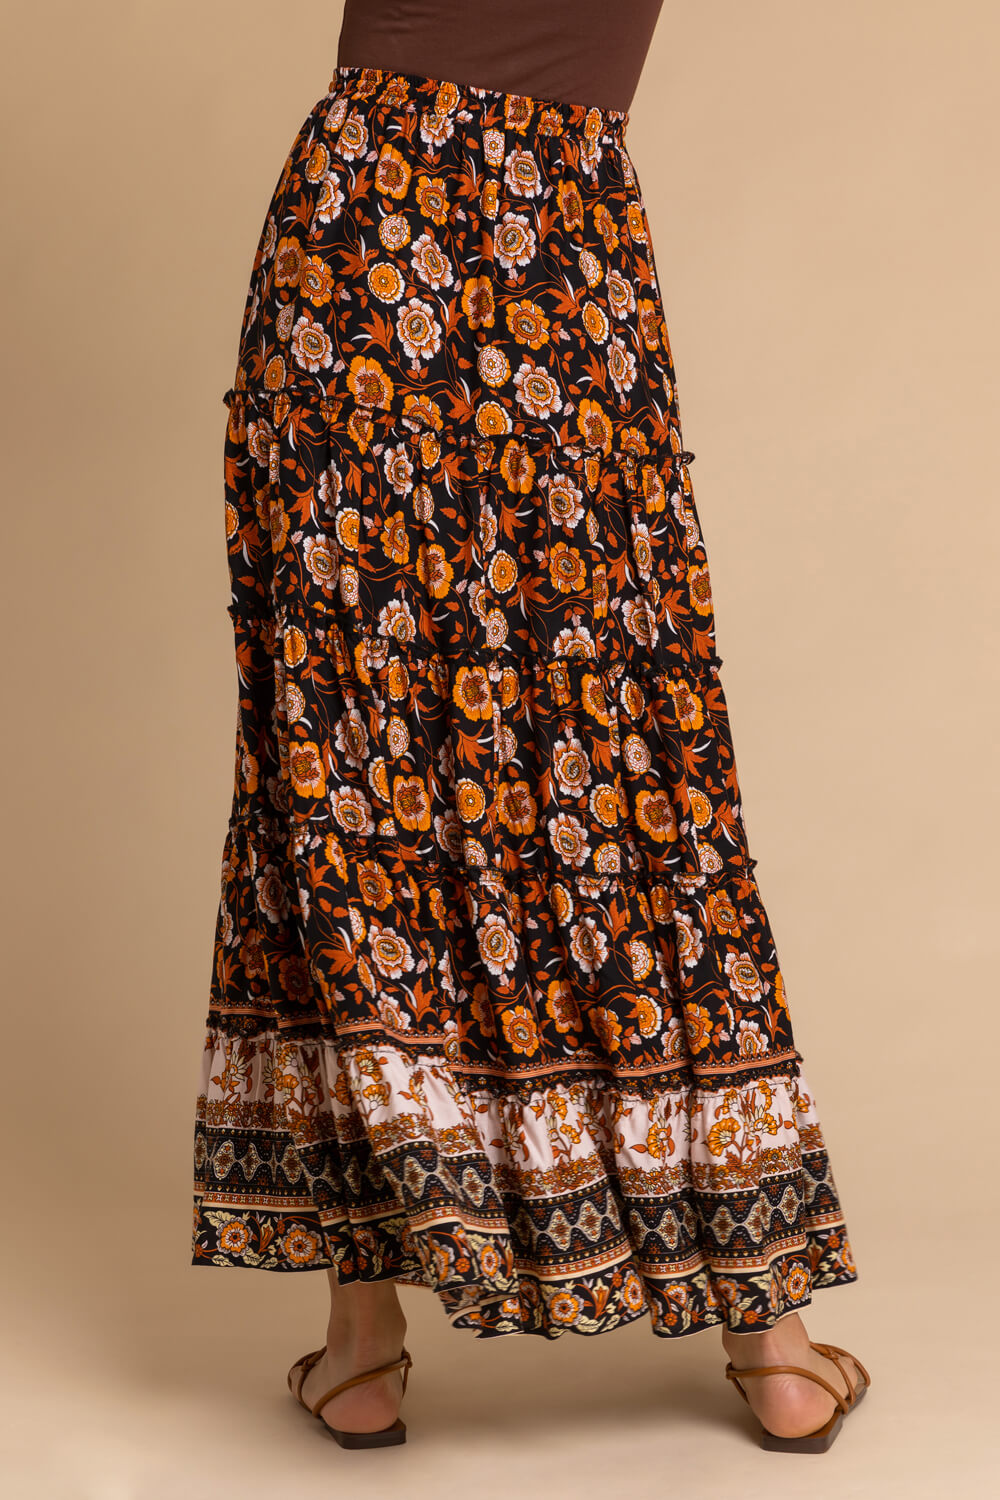 Black Floral Boho Print Tiered Maxi Skirt, Image 2 of 4